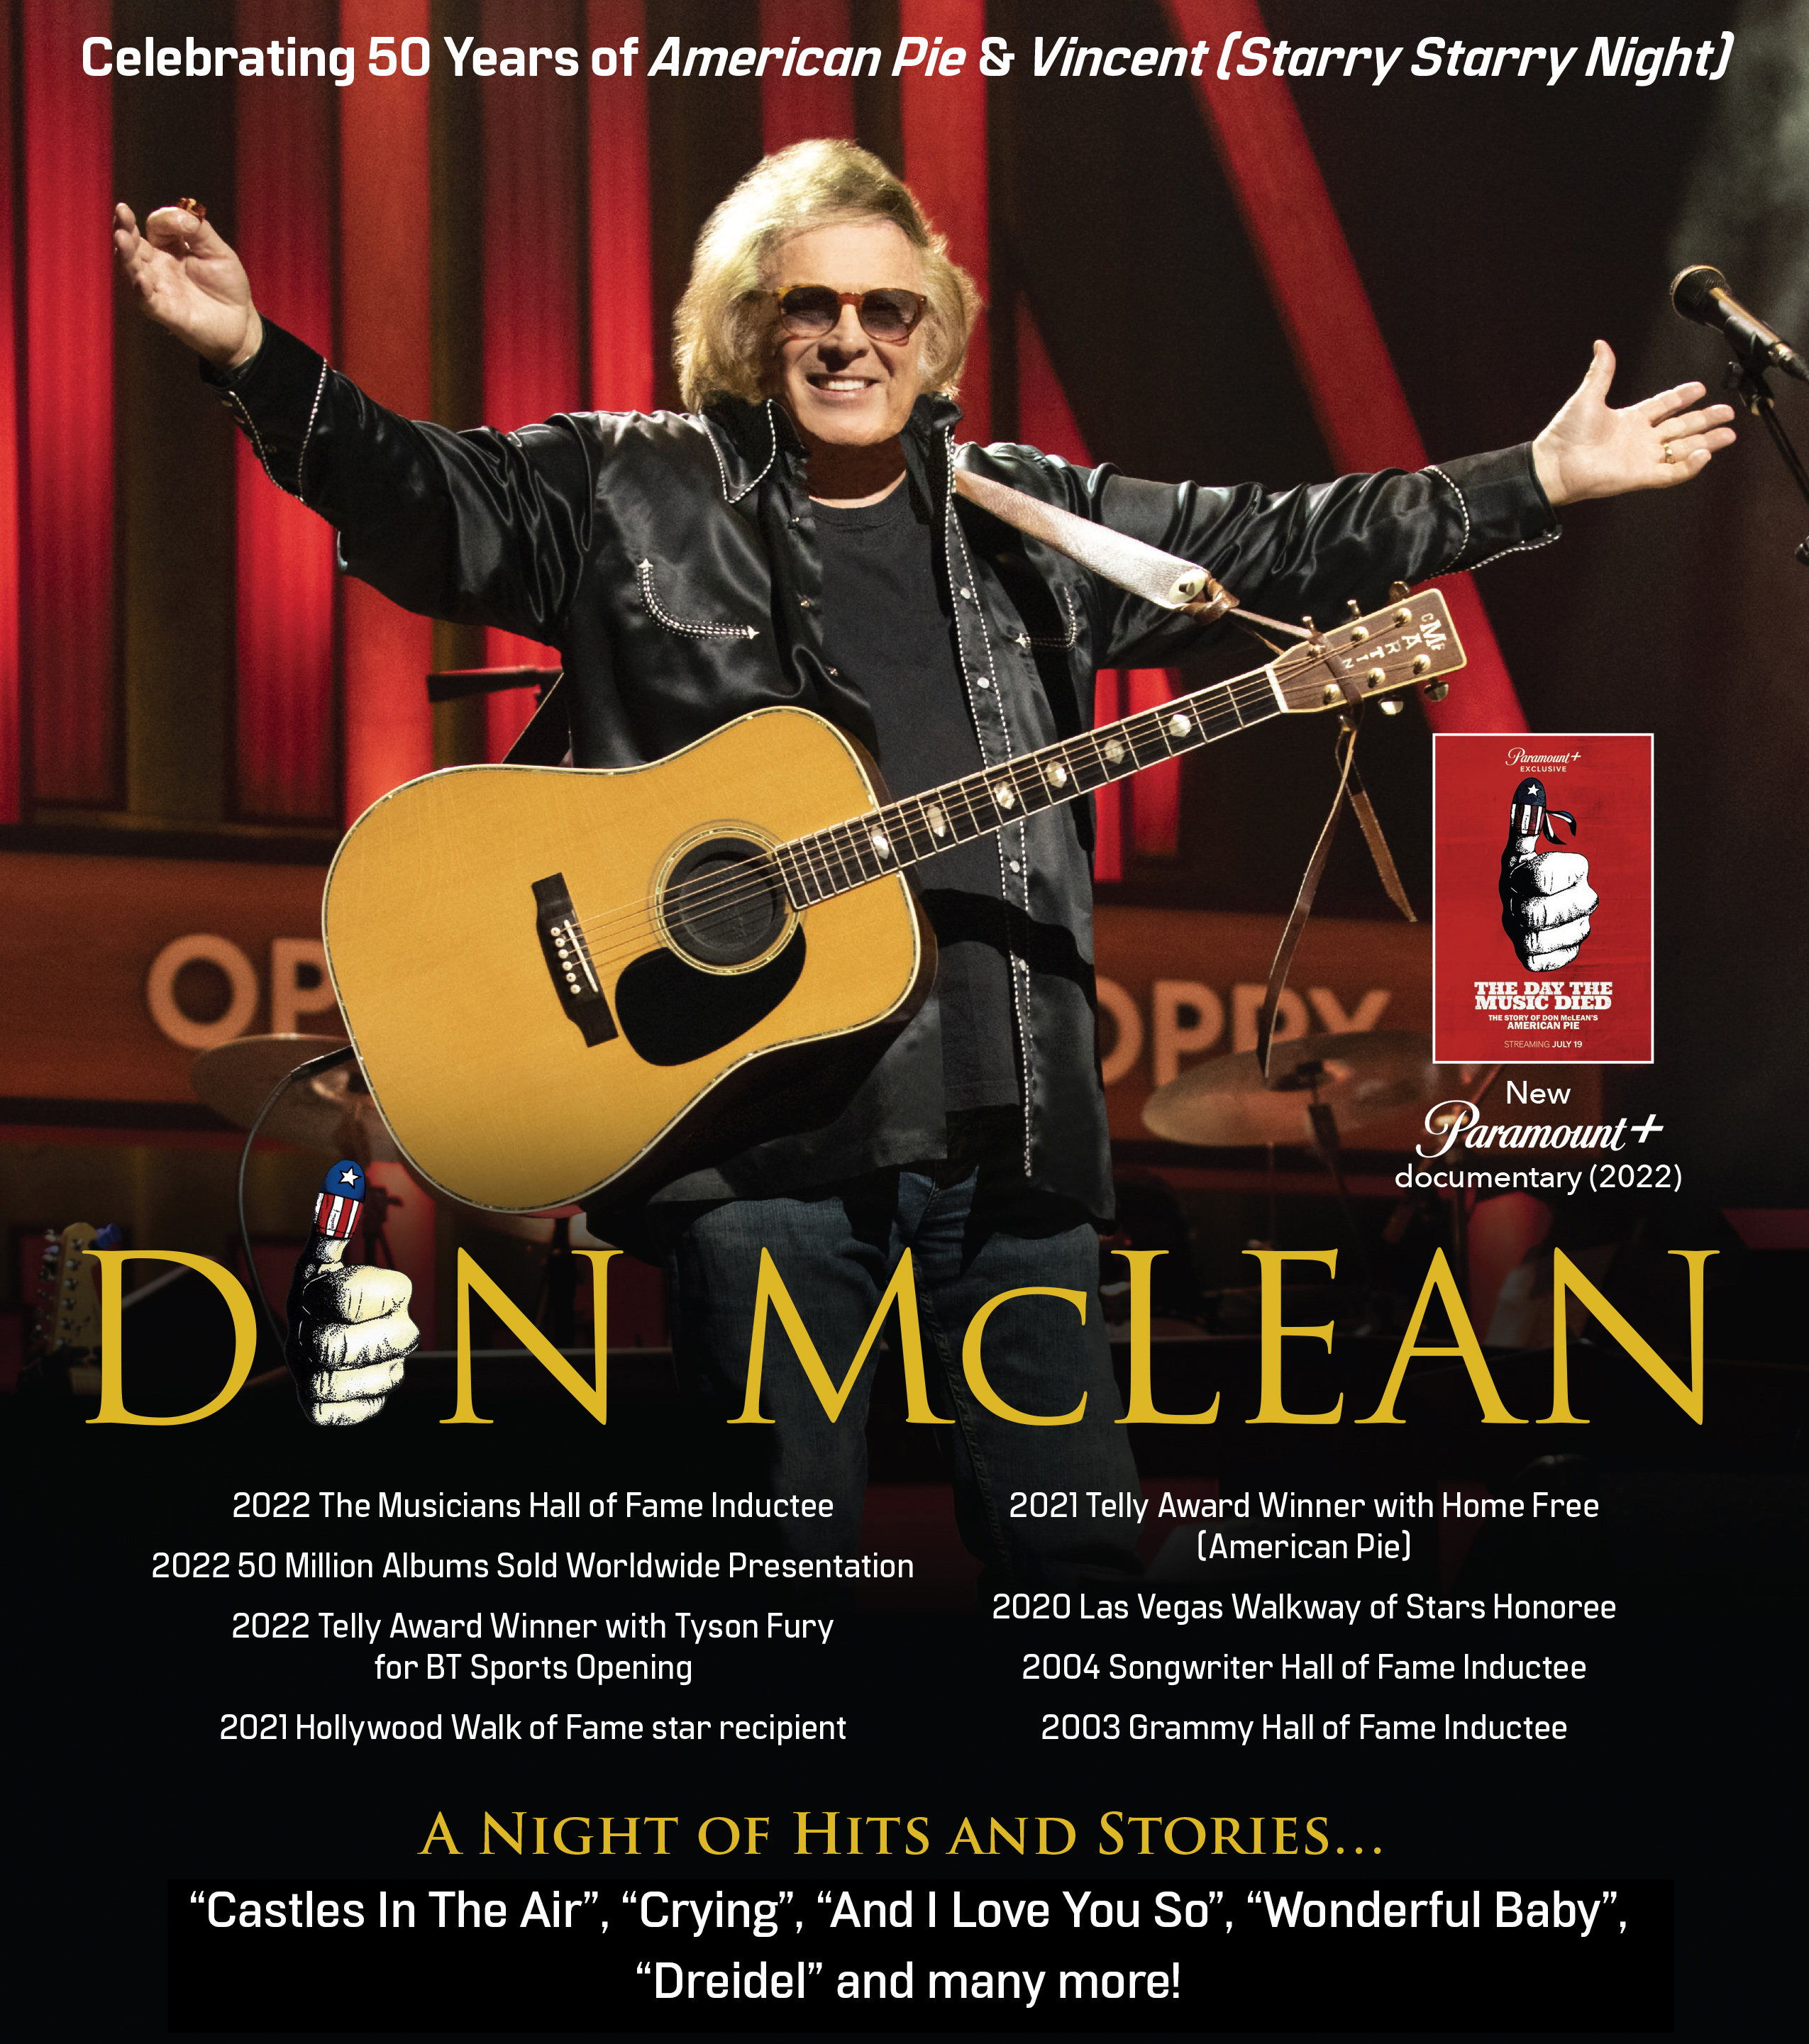 Don McLean Announces Fall Tour Dates In Celebration Of 50th Anniversary Of "Vincent (Starry, Starry Night)"